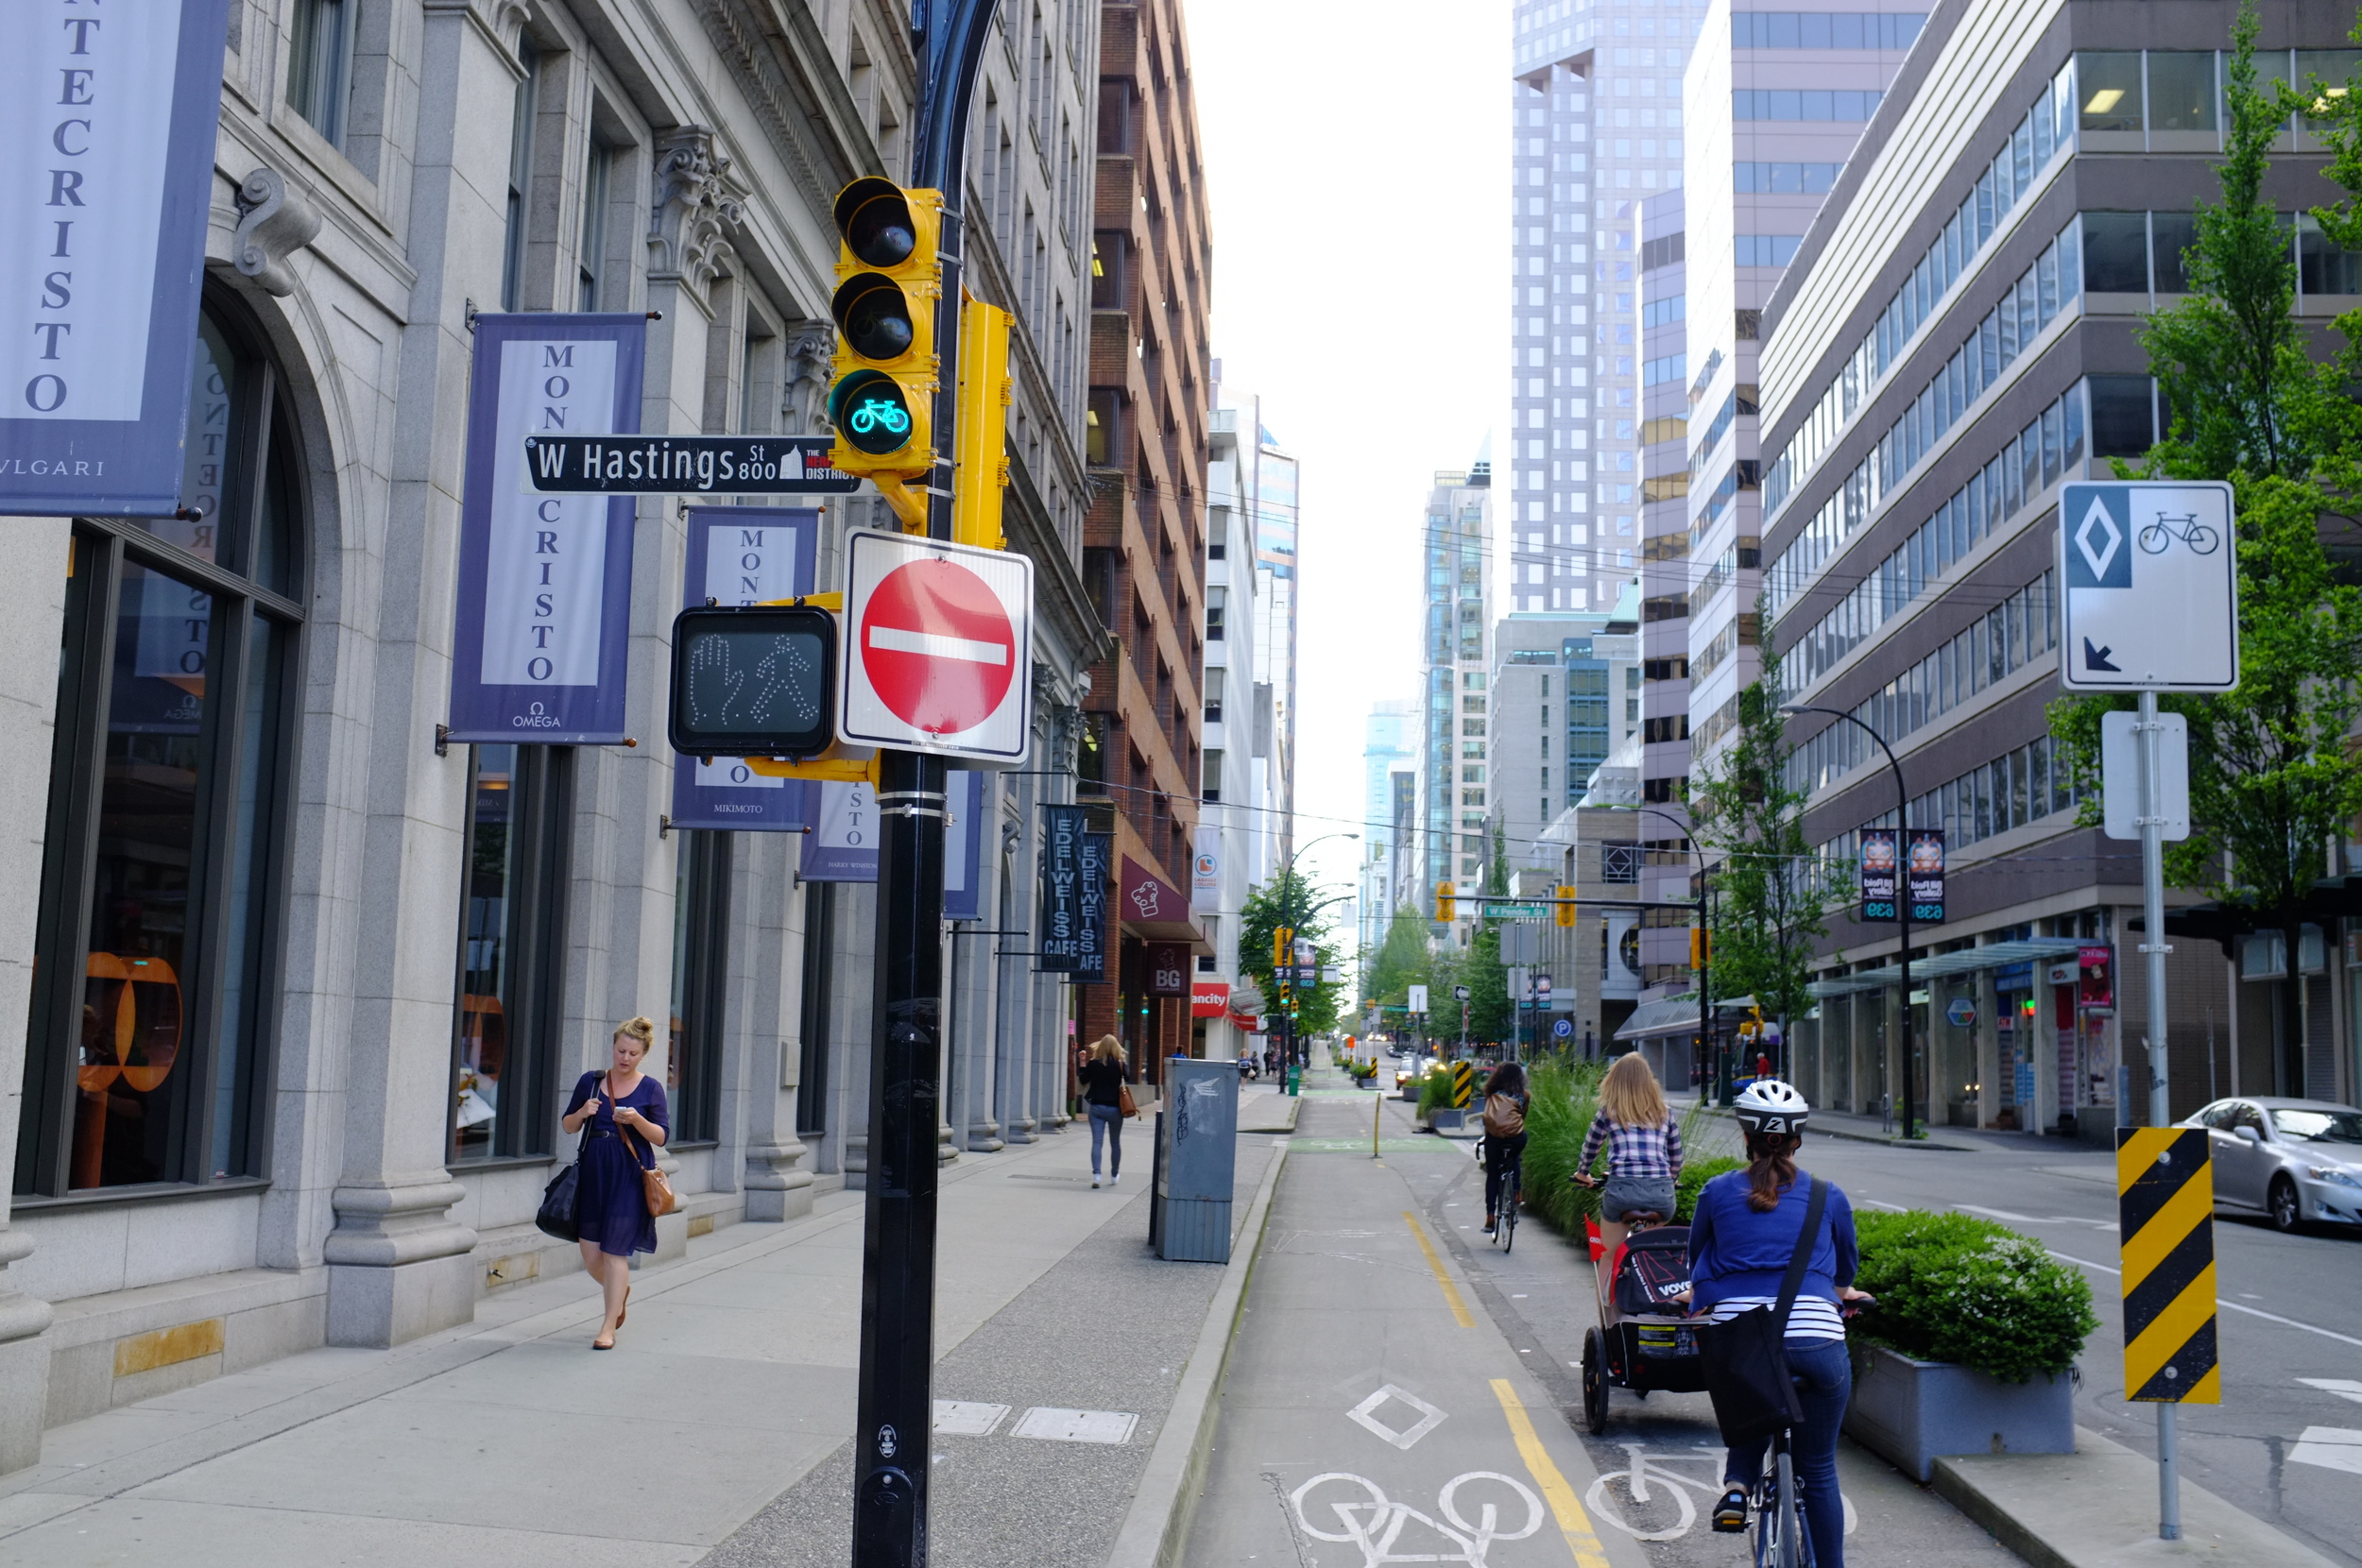 Vancouver's protected bikeways let riders travel safely to restaurants and shopping